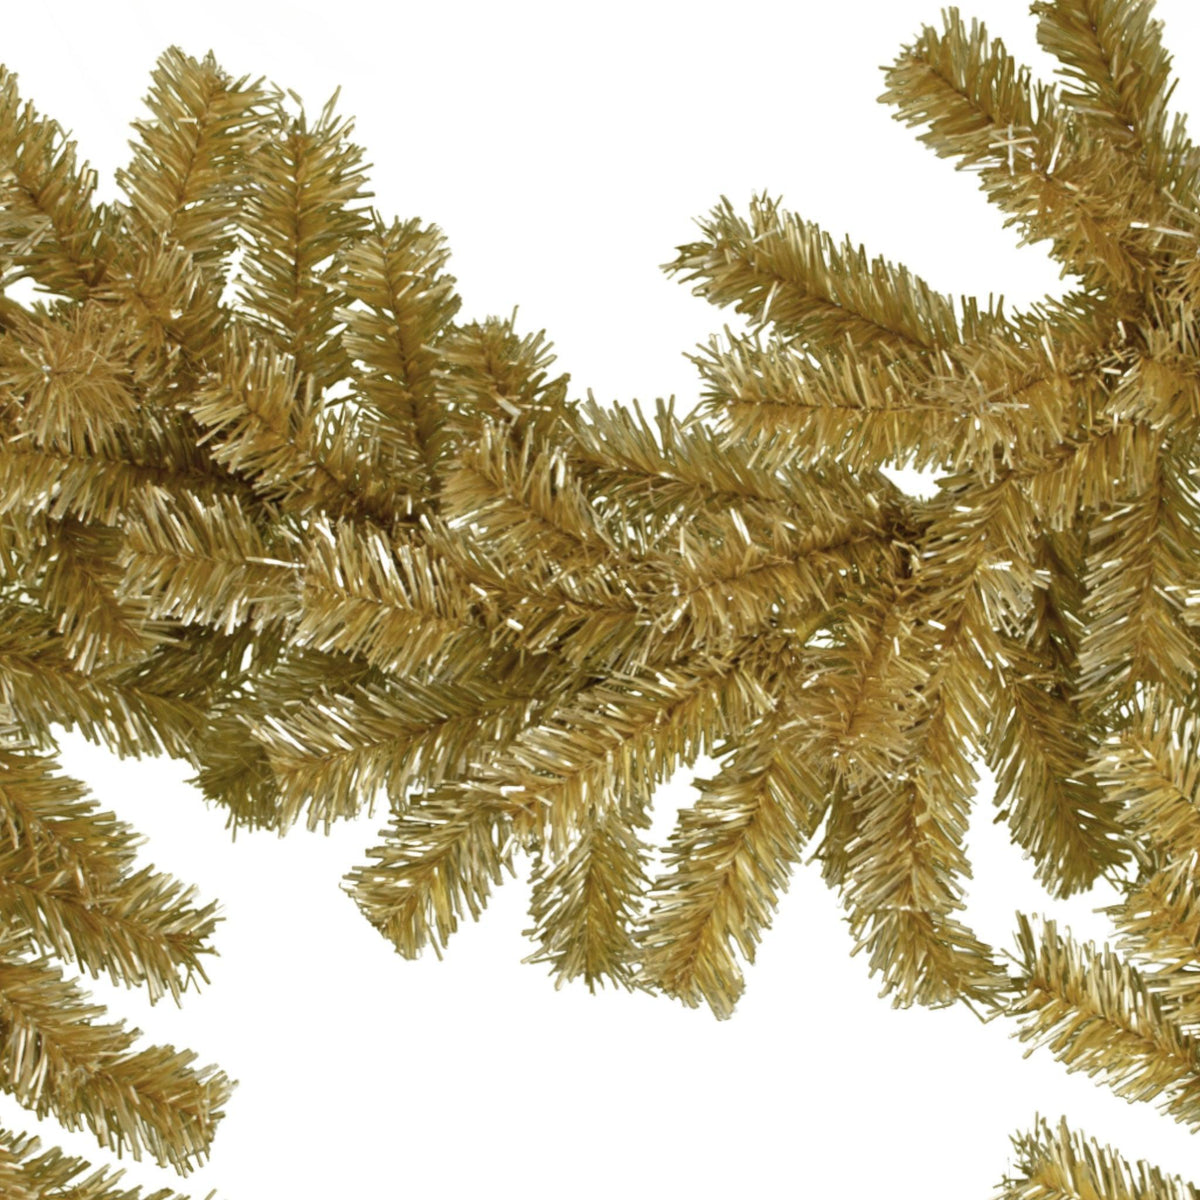 Celebrate Lee Display's 120th Anniversary with our brand new Antique Gold colored tinsel Christmas Brush Garland.  Sold in 6FT Lengths at leedisplay.com